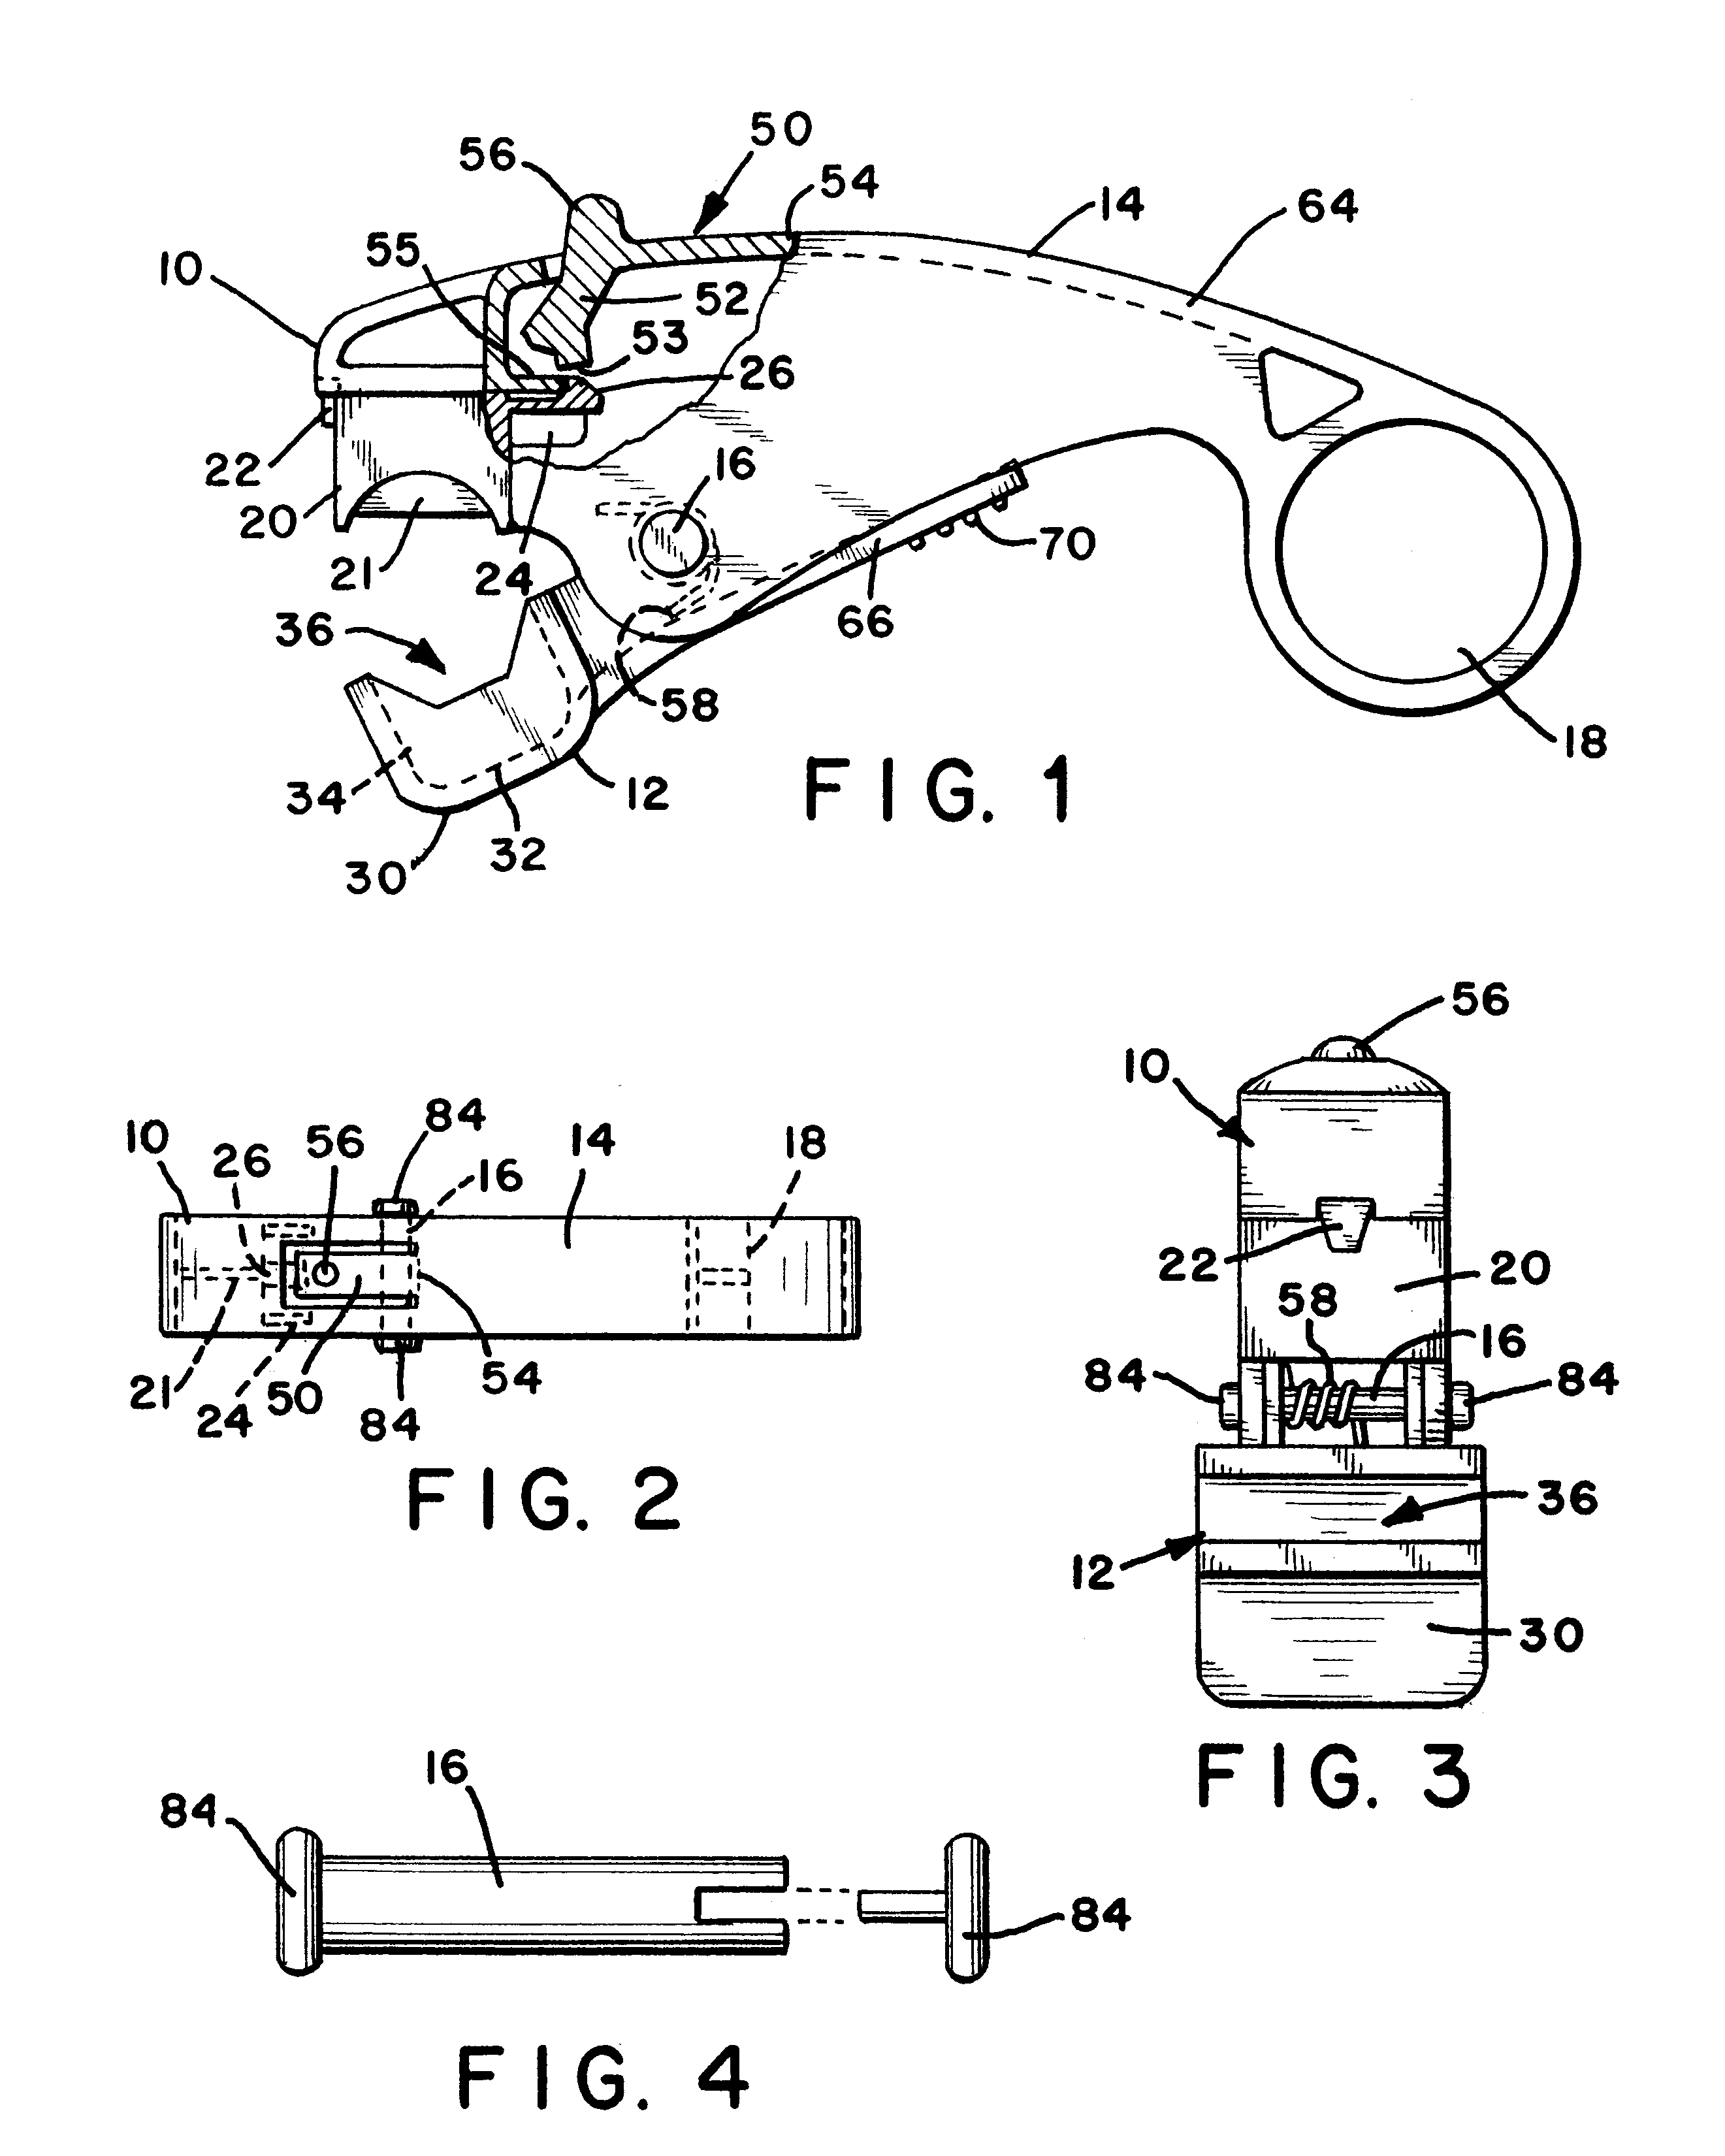 Single drop trimmer with limited cartridge release